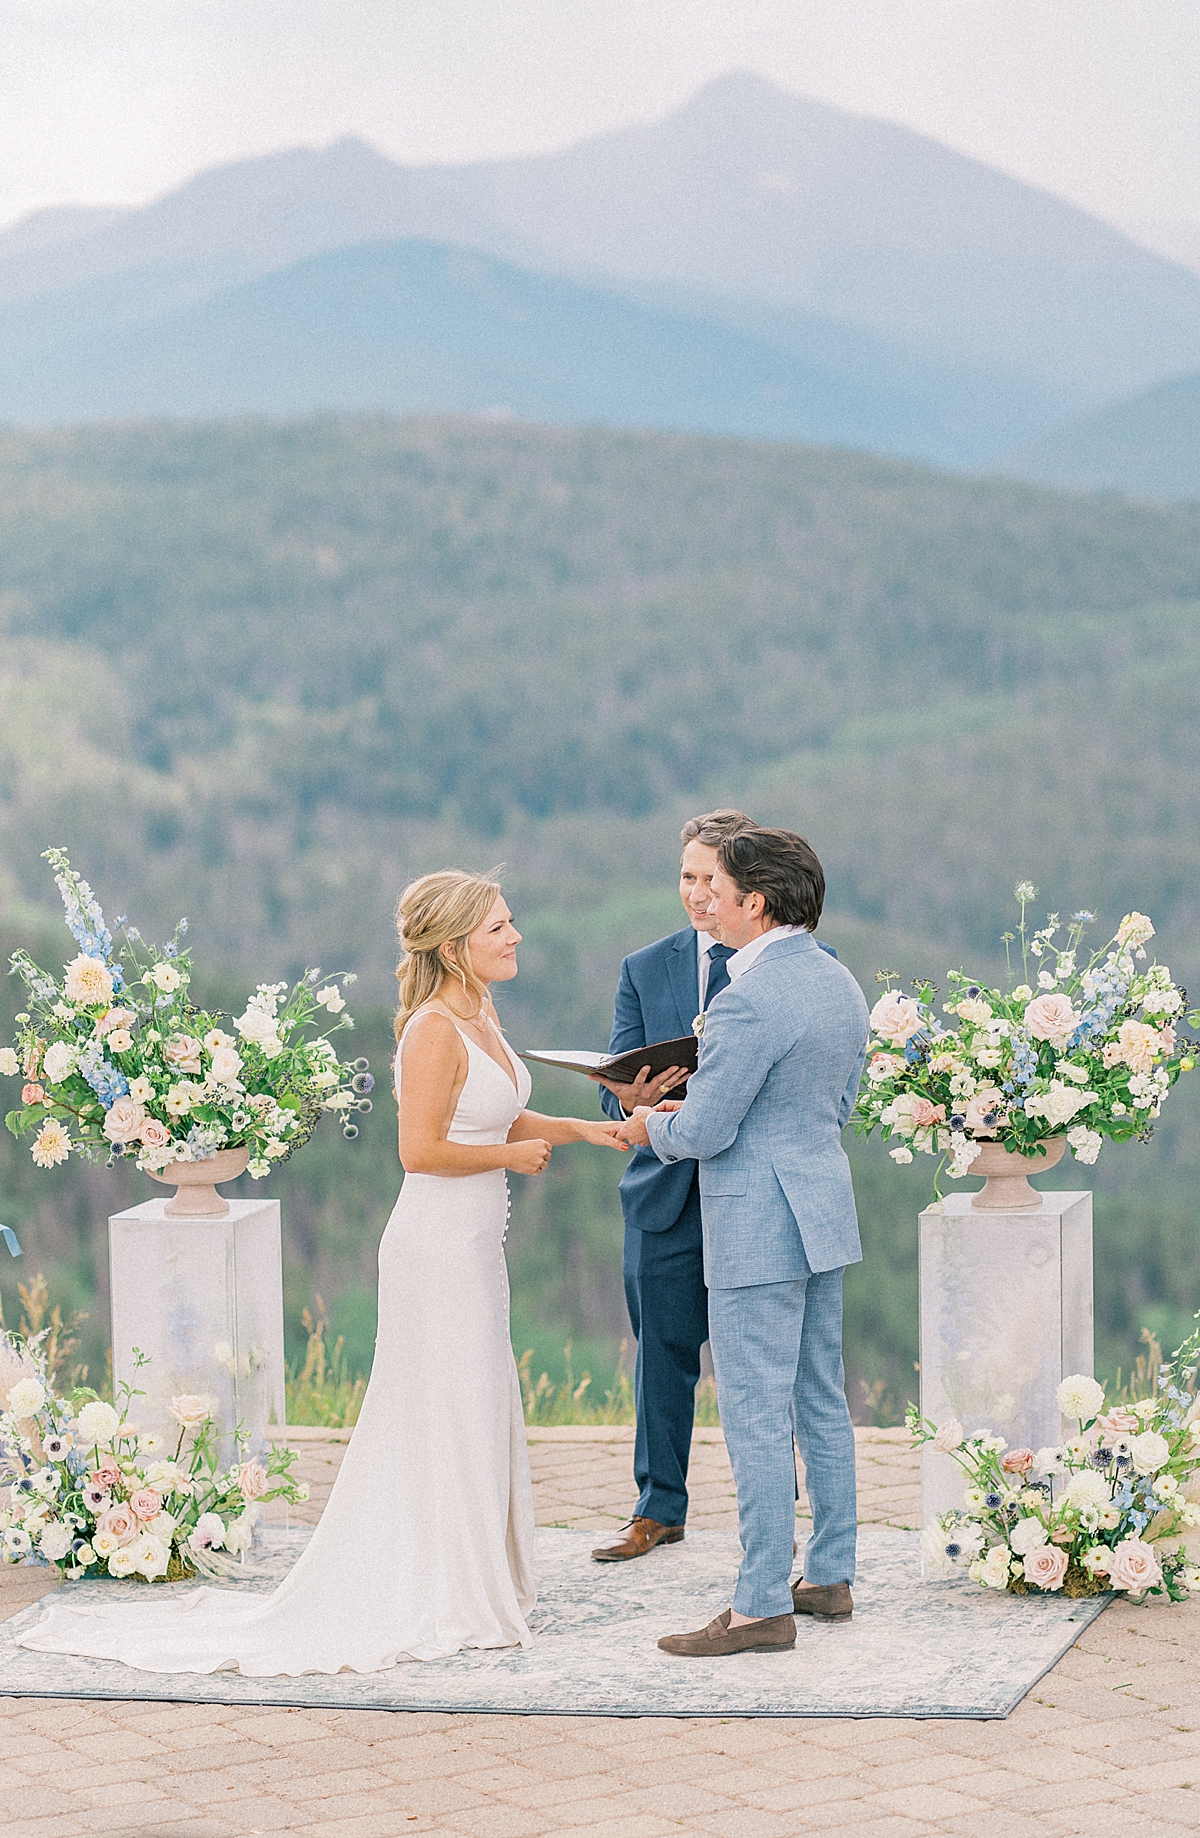 This is a beautiful wedding ceremony in shades of dusty blue atop Vail mountain at the Vail mountain wedding deck.